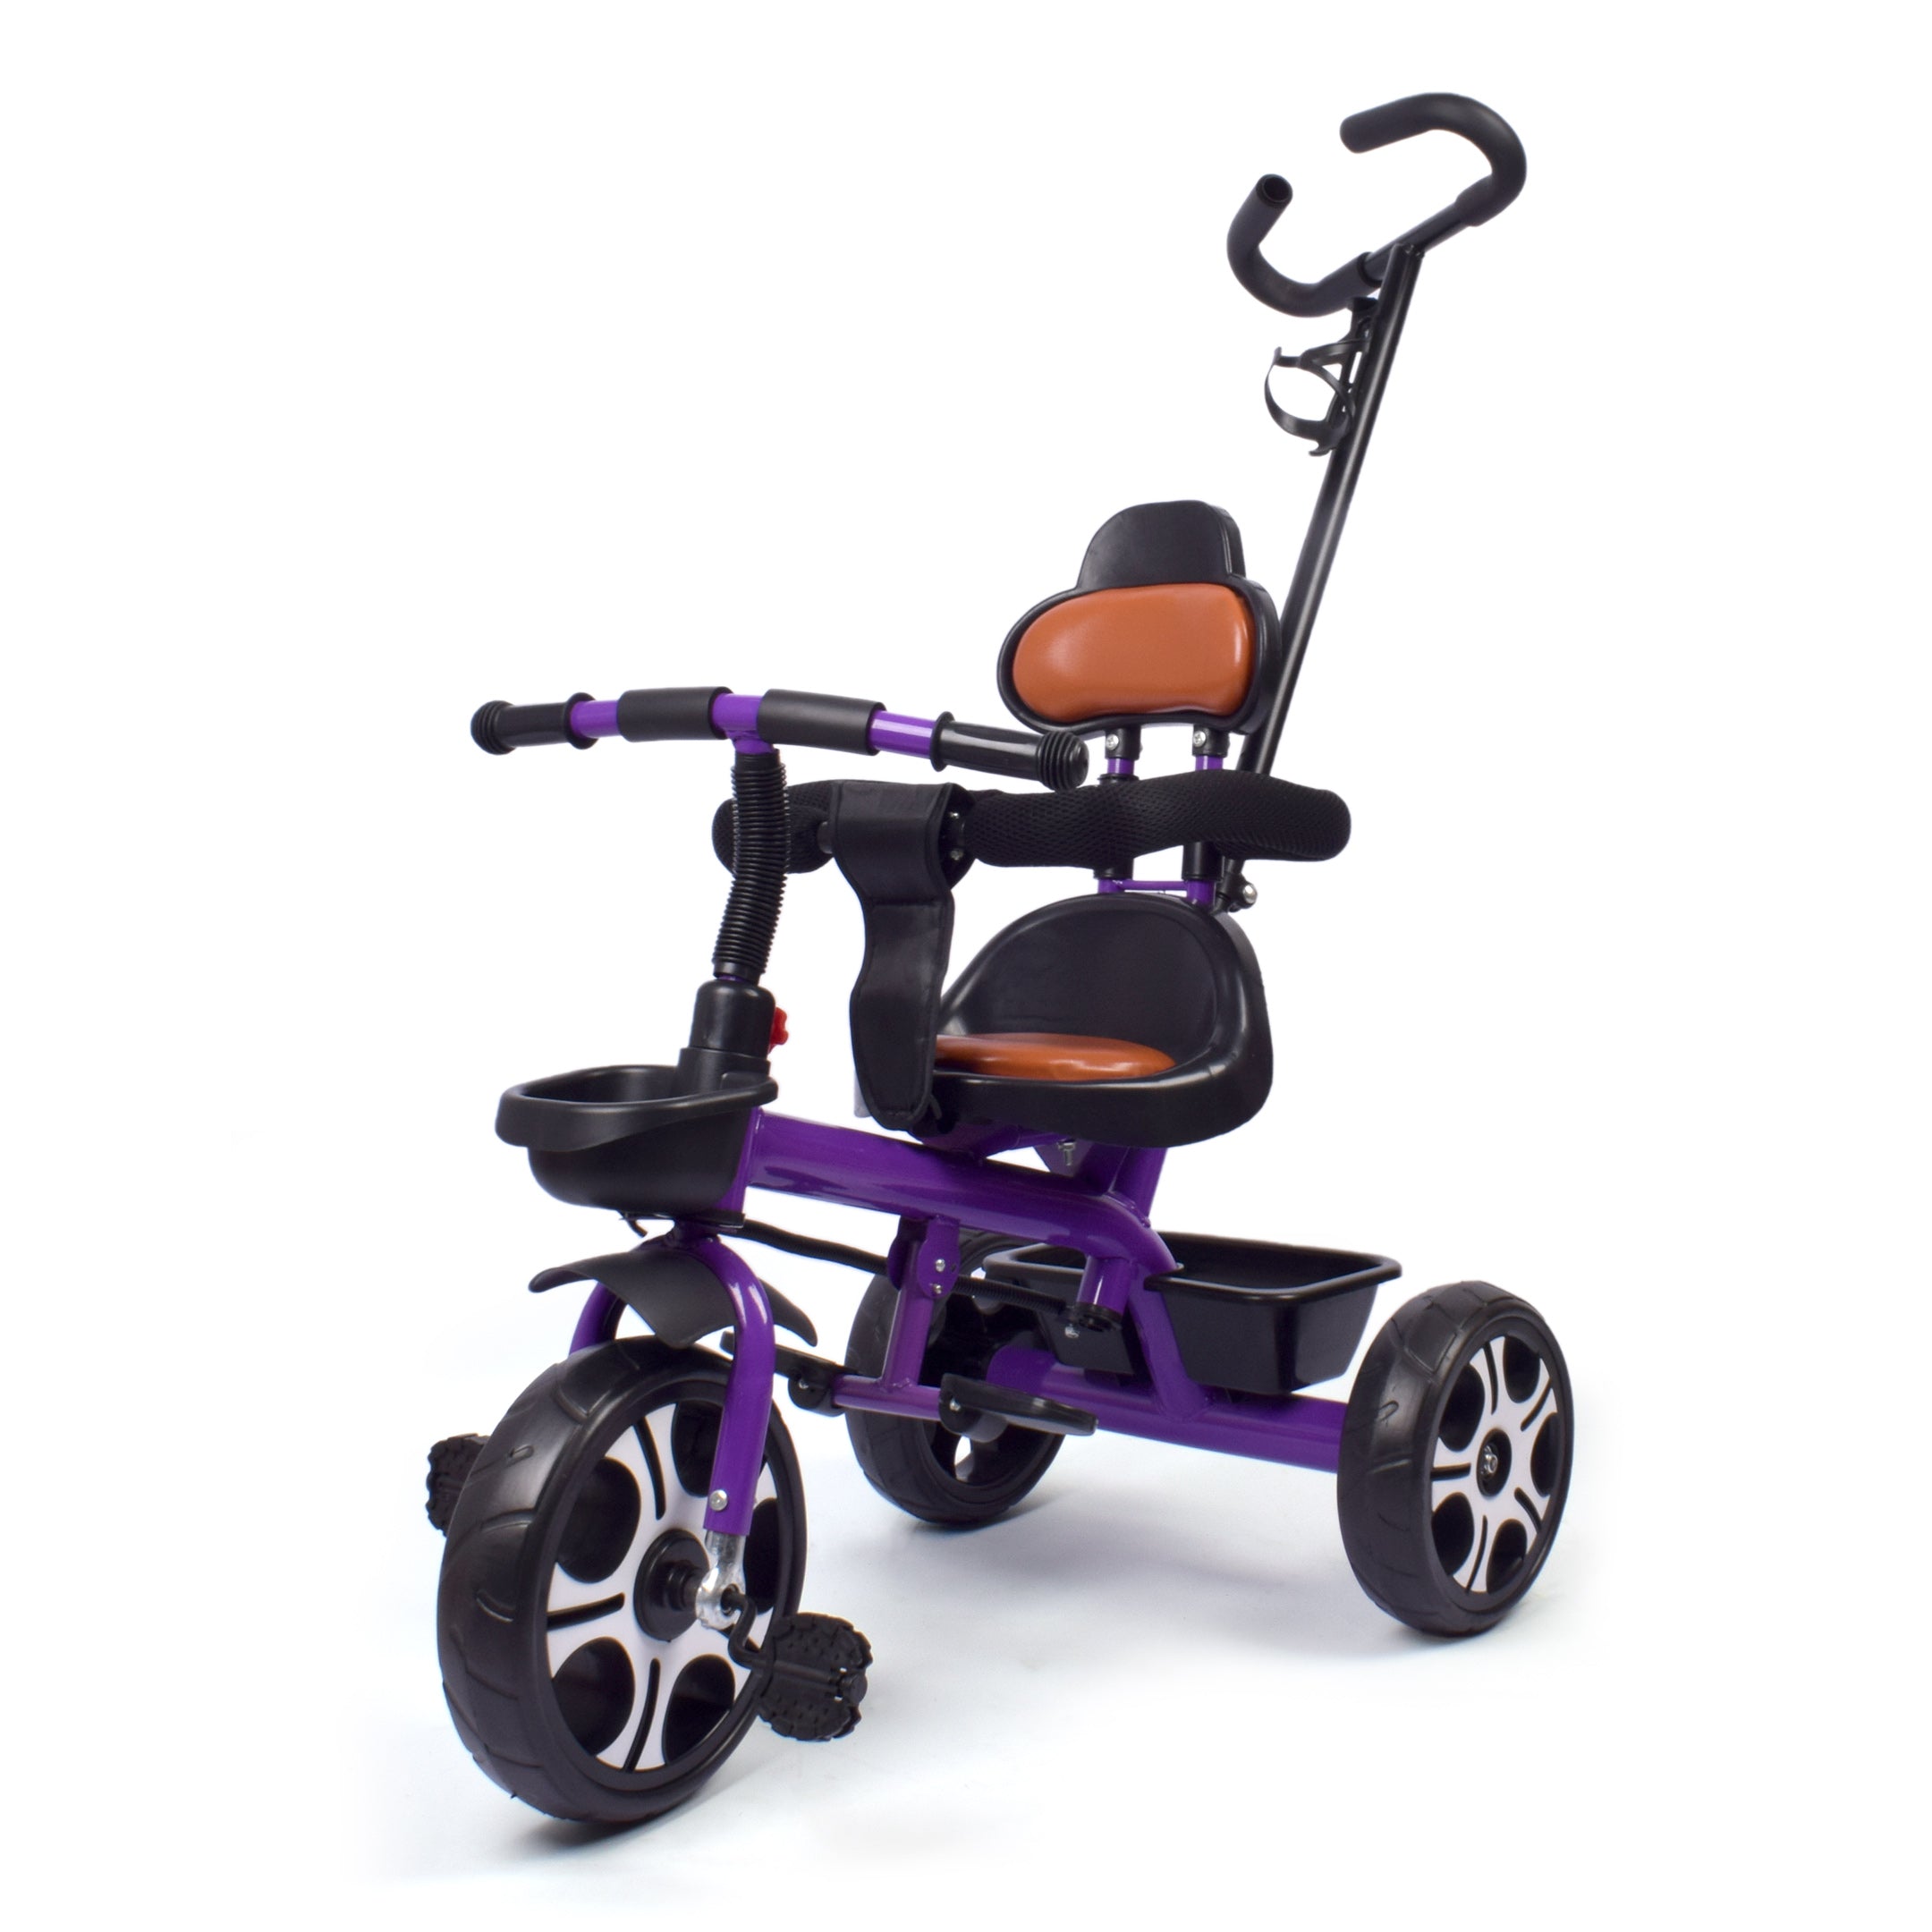 Premium Quality Kids Tricycle With Push Bar - Purple